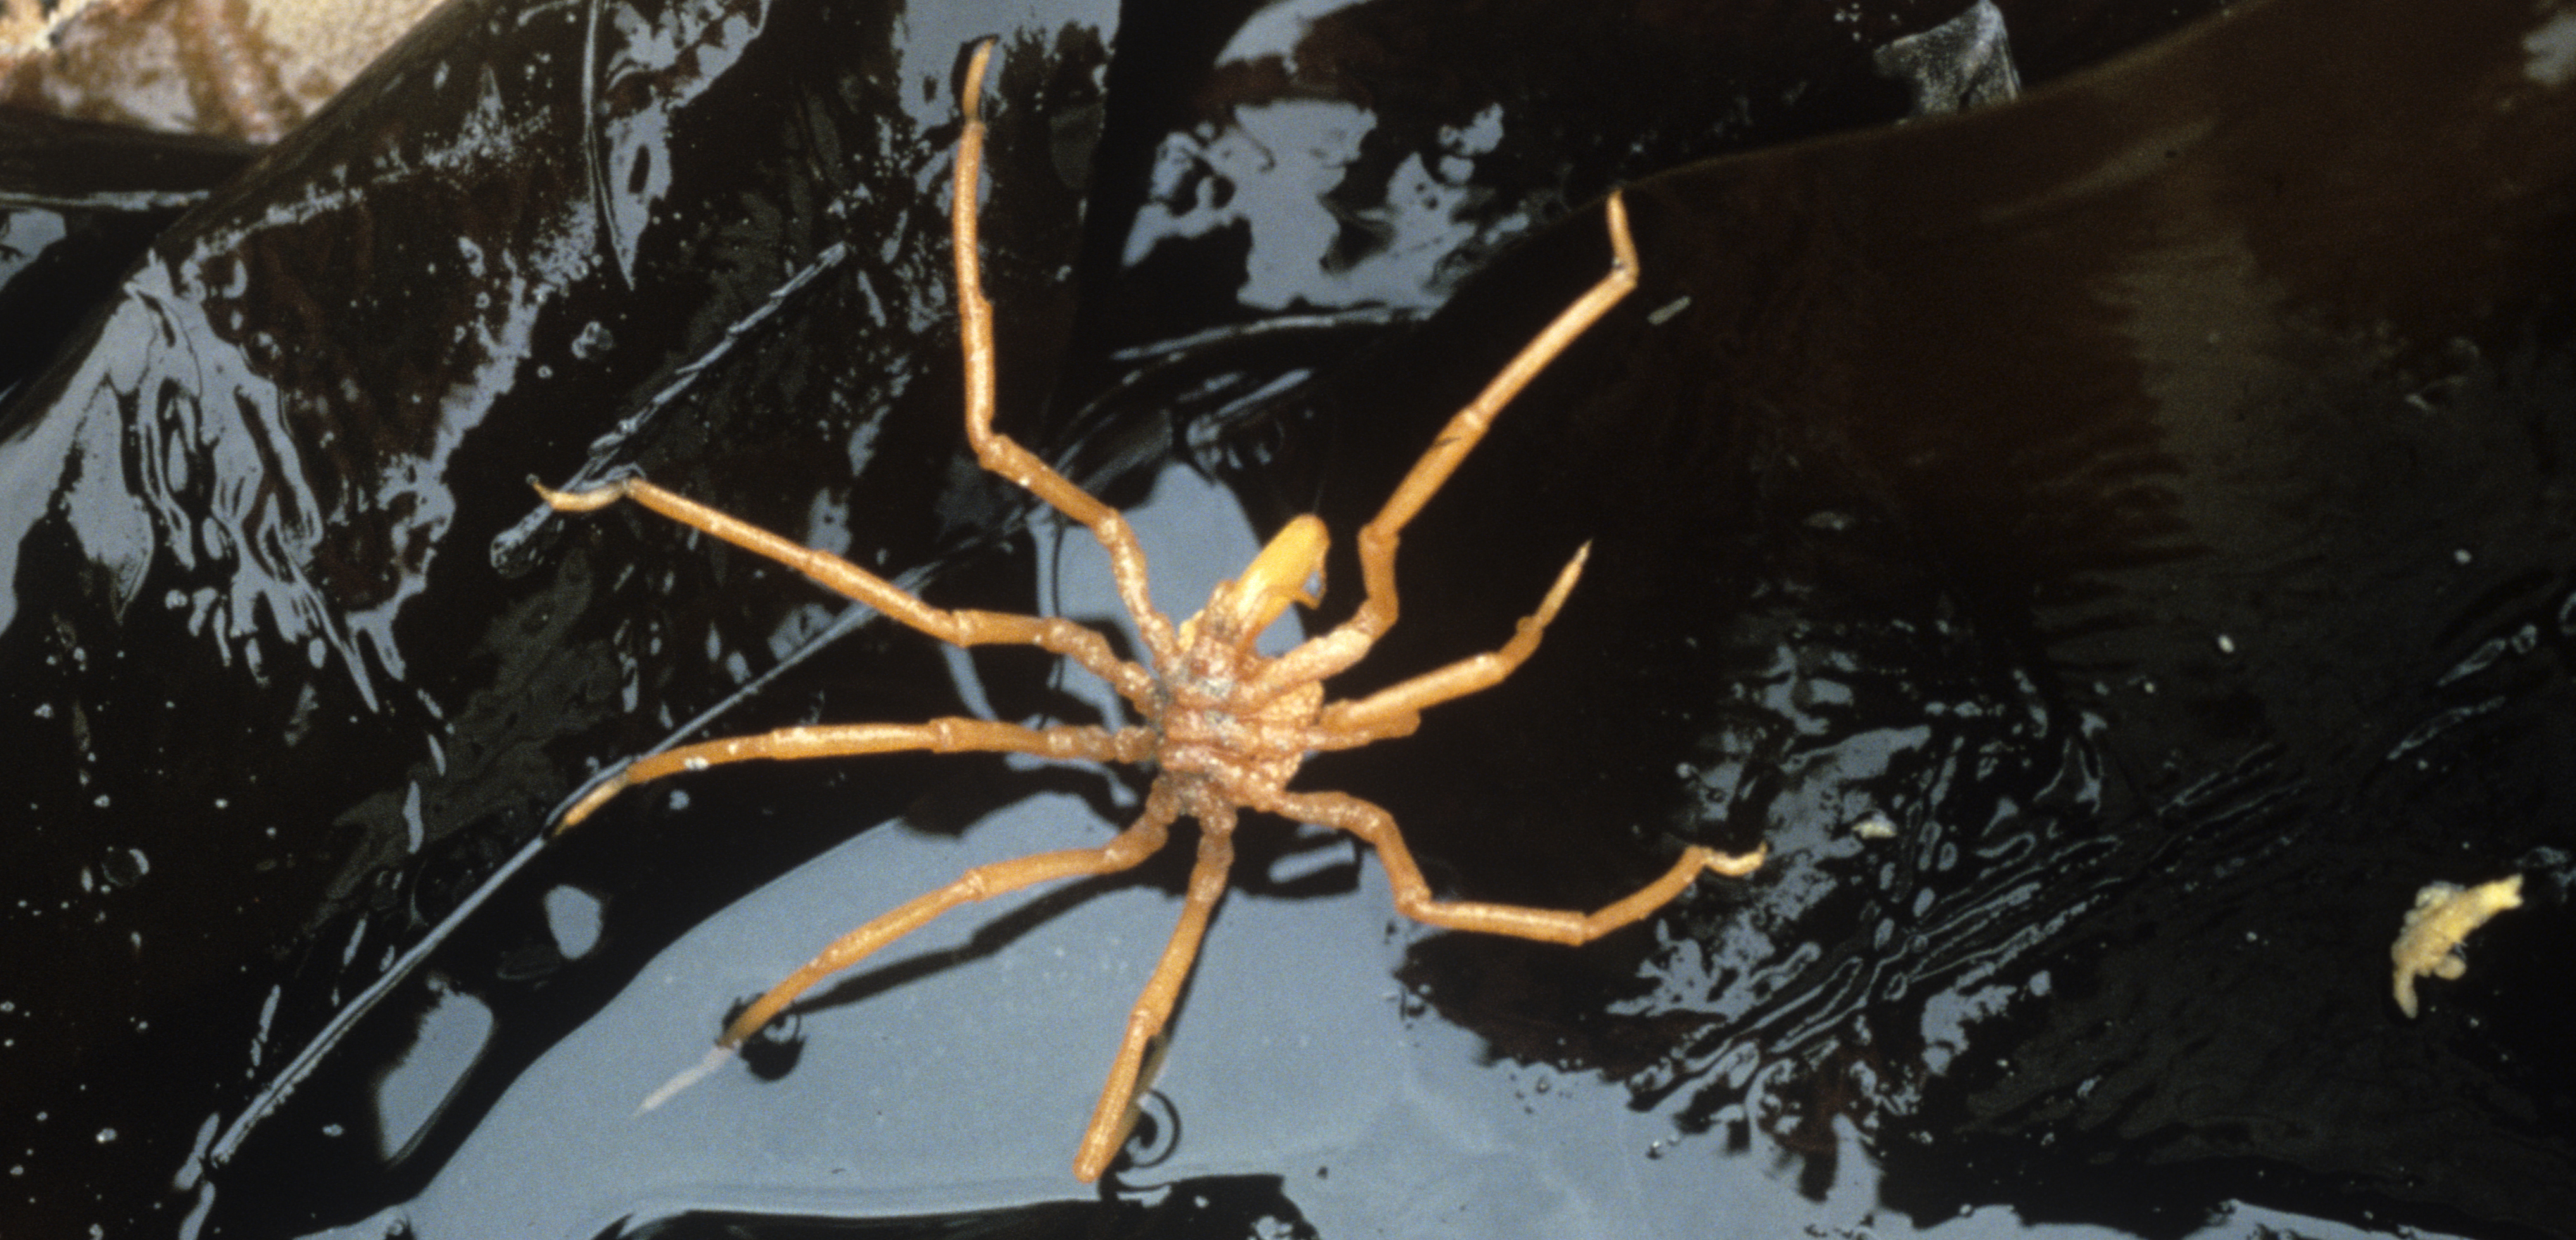 Some Antarctic sea spiders span nearly 25 centimeters from leg tip to tip. Photo by Frank Awbrey/Visuals Unlimited/Corbis 